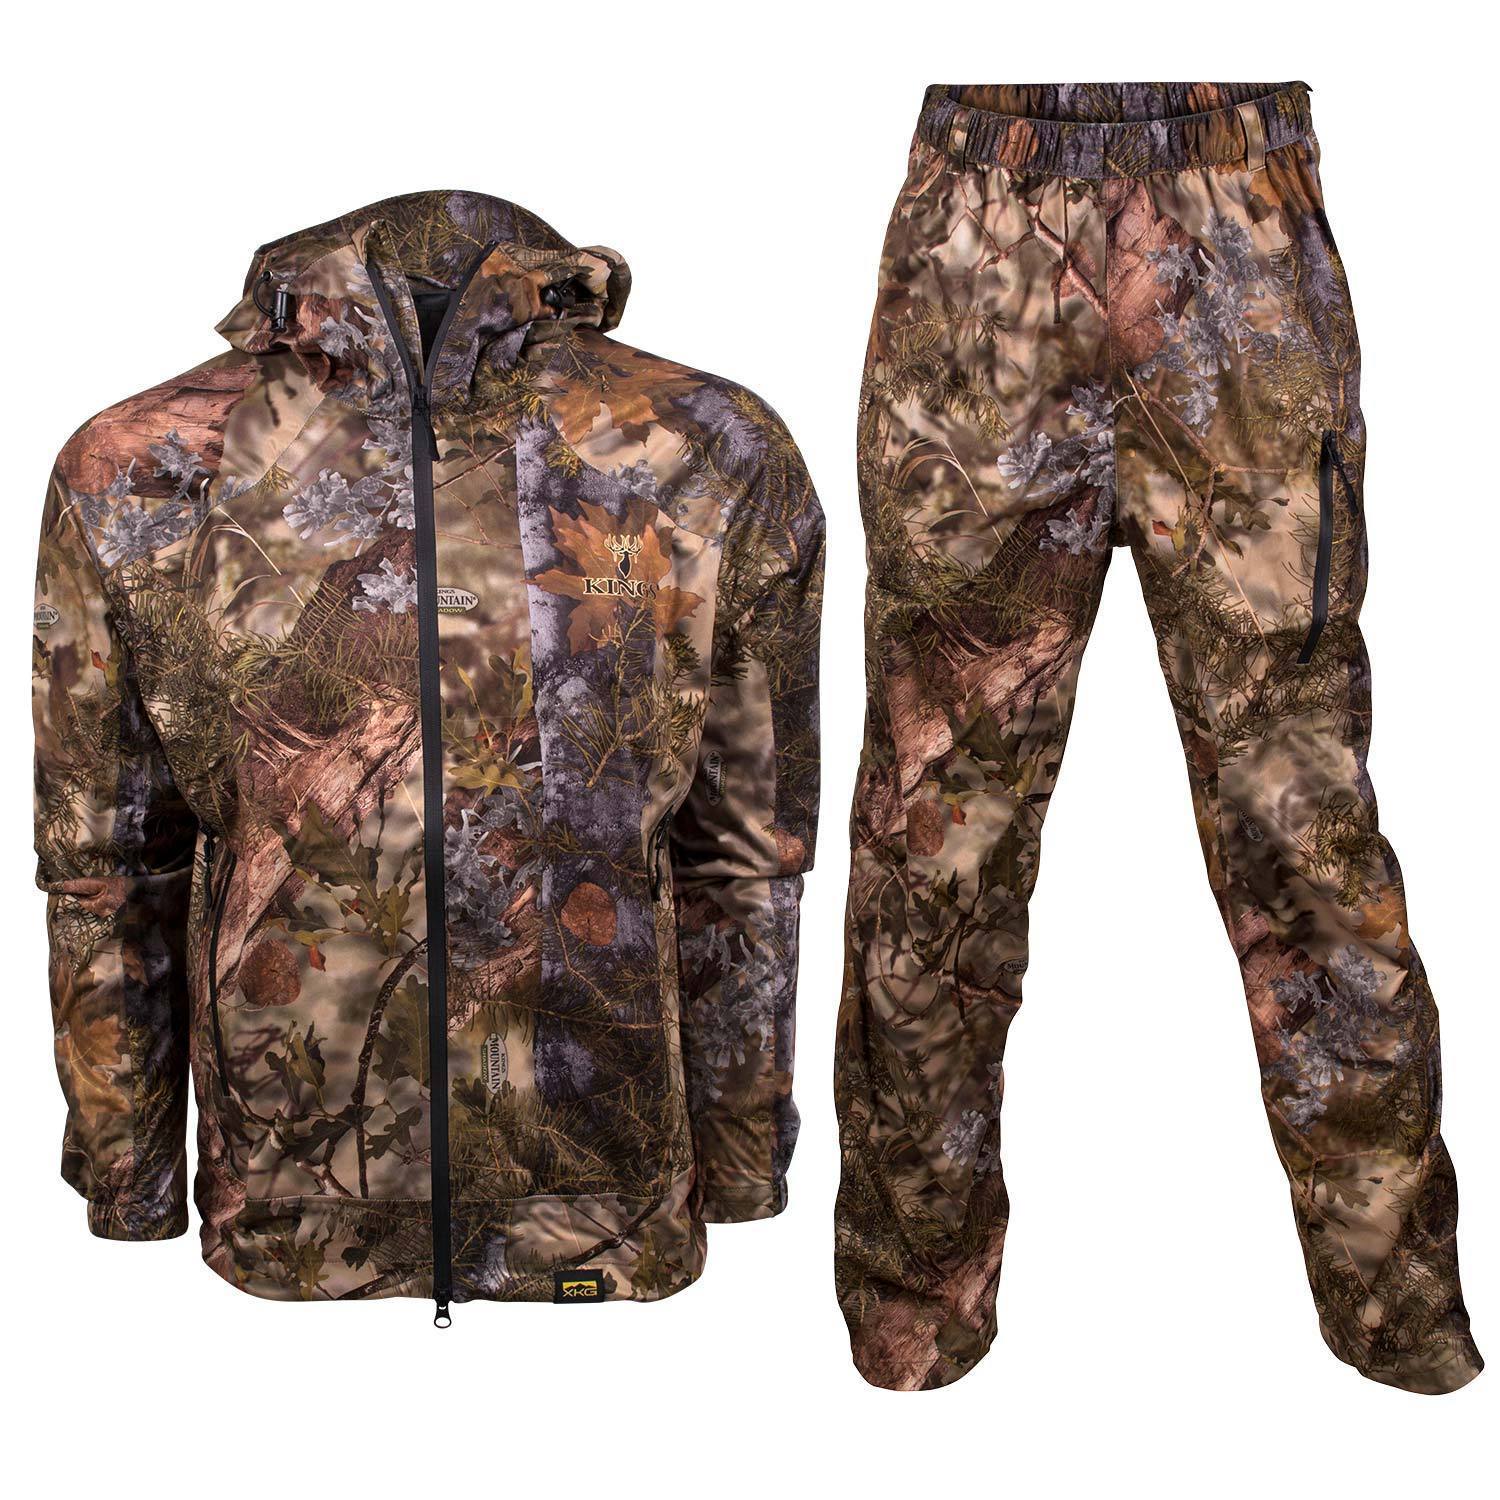 Men's StormShield Insulated Fishing Hunting Pro DWR Water Camouflage Wading  Rain Jacket